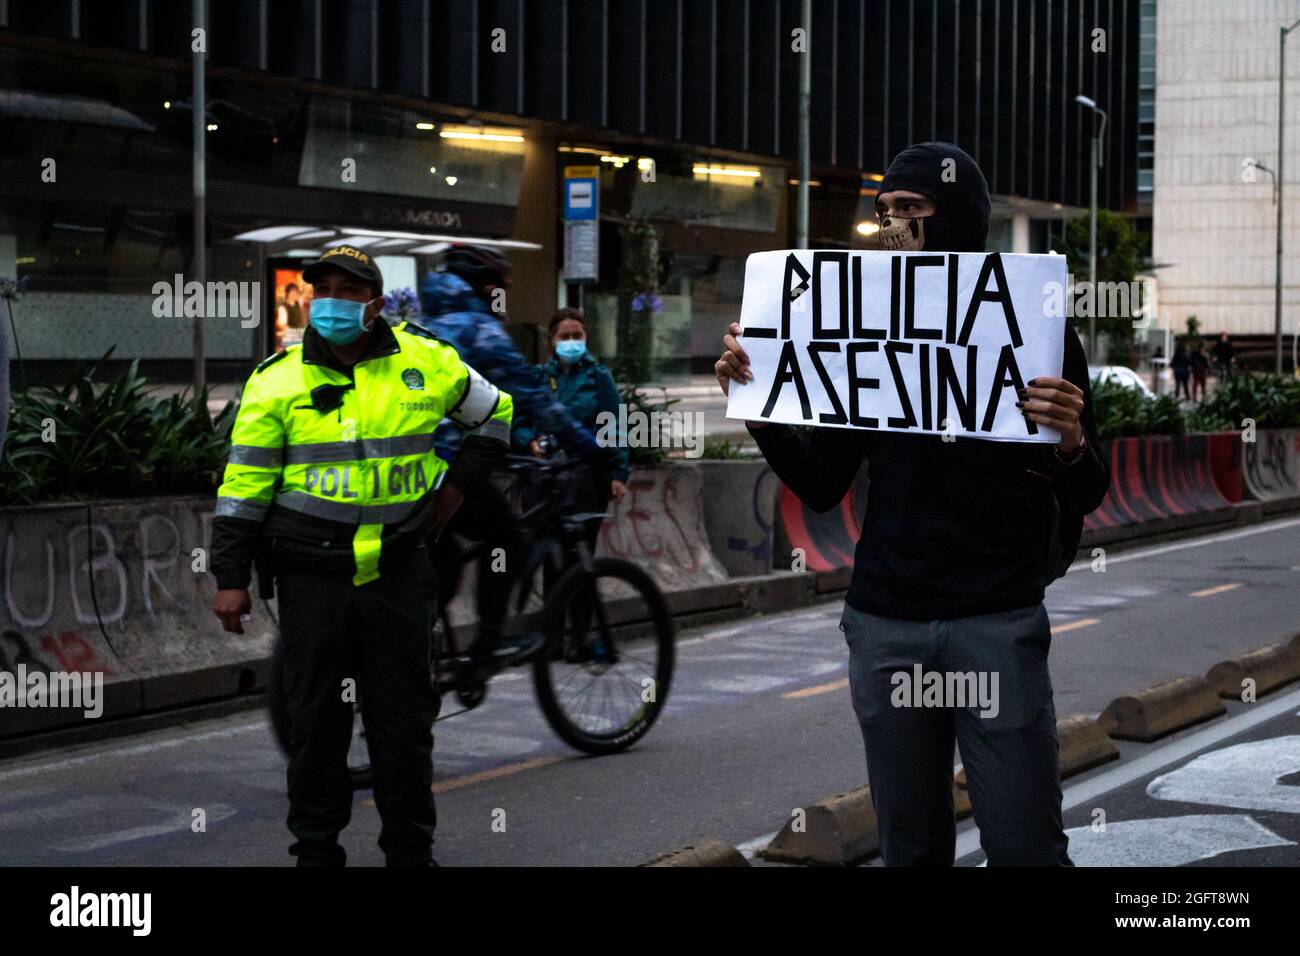 A demonstrator rises a banner that reads 'Killer Police' during a rally organized by students of the Universidad Distrital, after a few days back Esteban Mosquera, a social leader and community member was killed two years after loosing his eye on a police brutality case, in Bogota, Colombia on August 26, 2021. Stock Photo